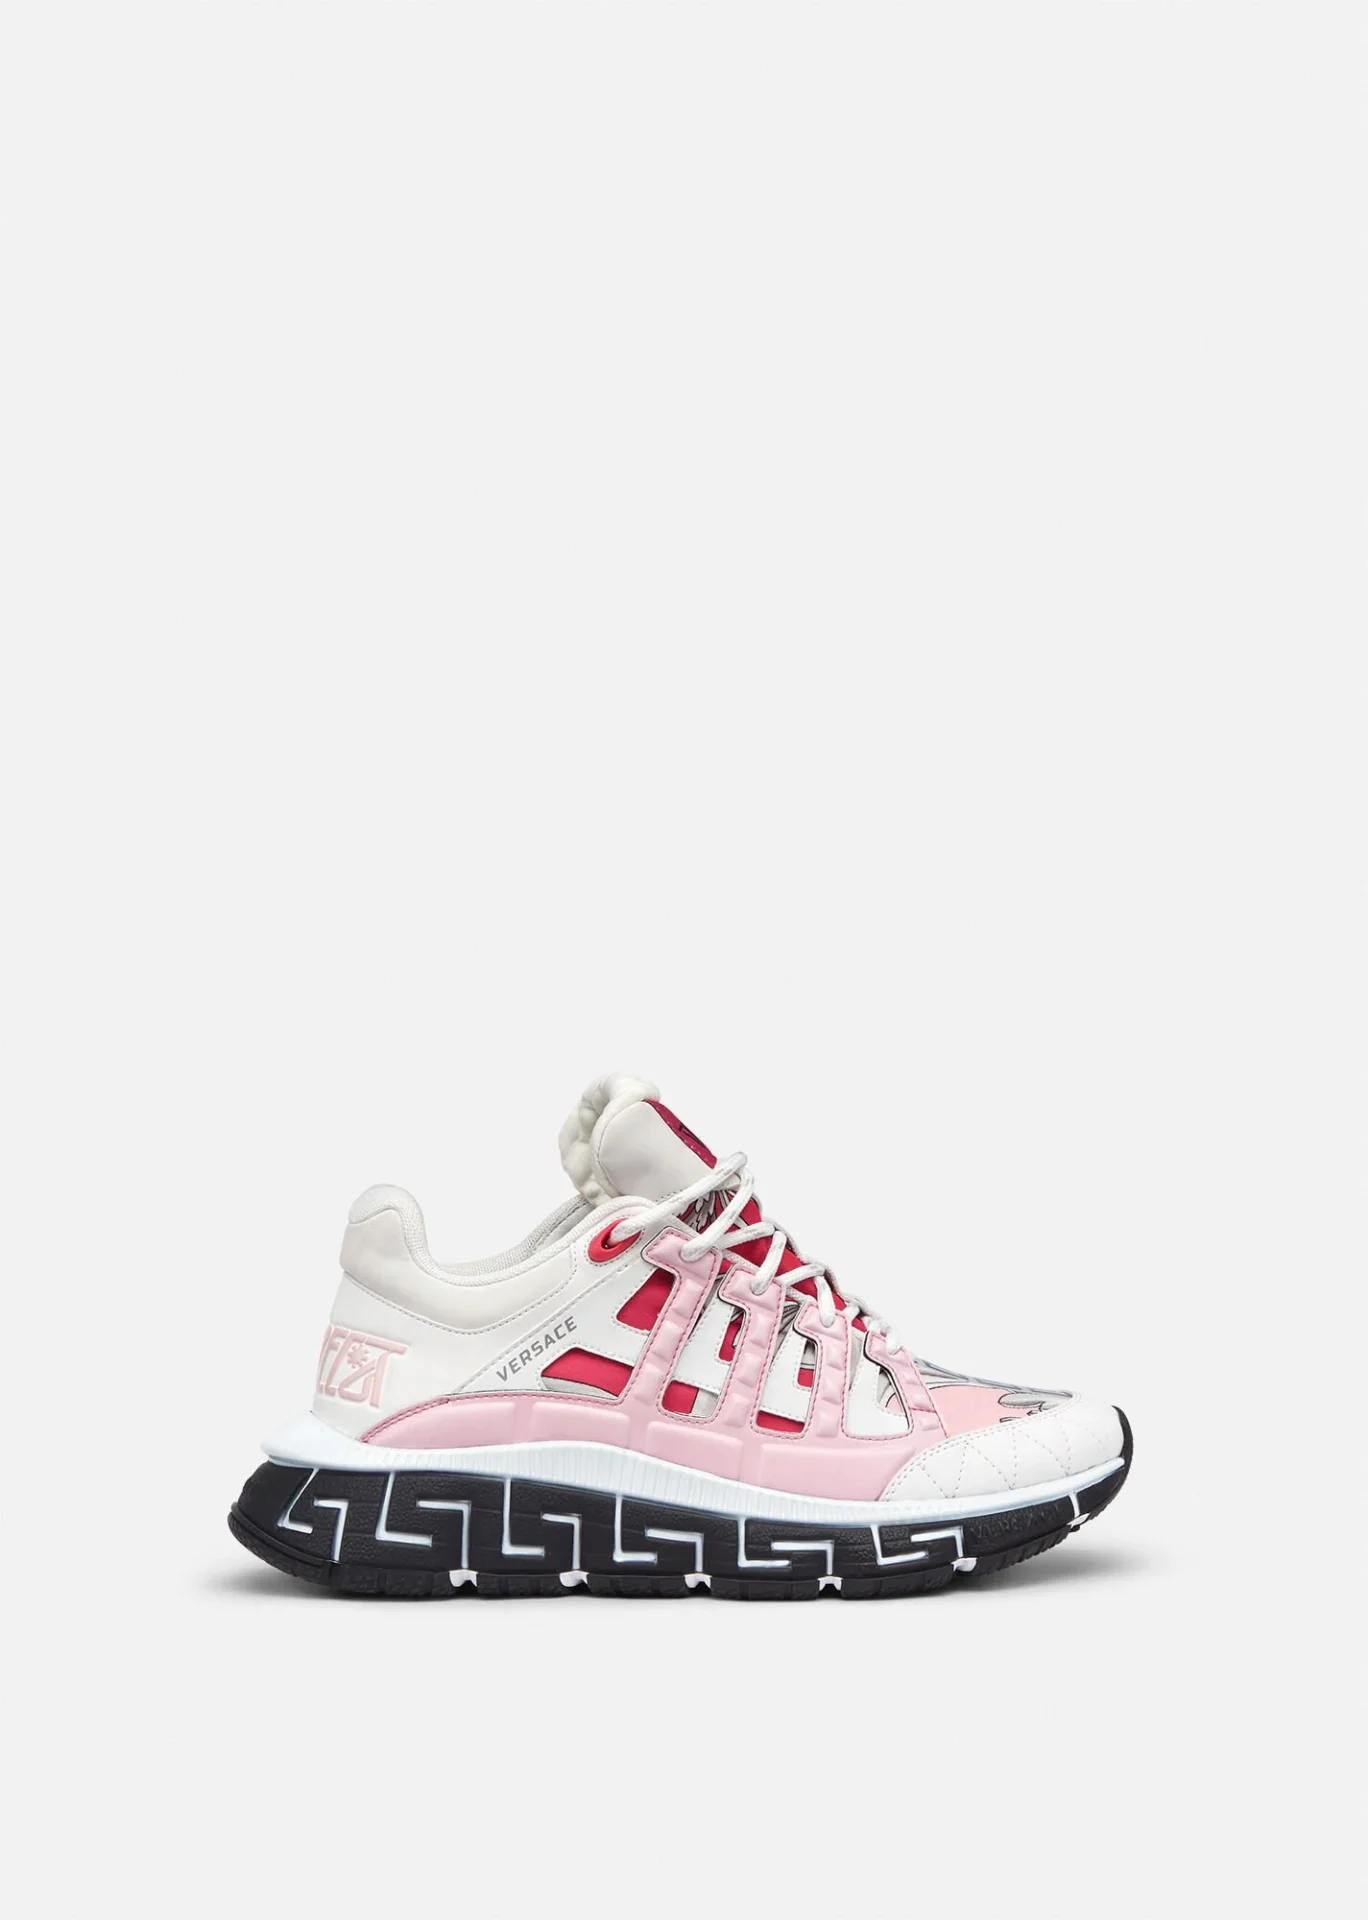 A versace trigreca sneaker in pink and black